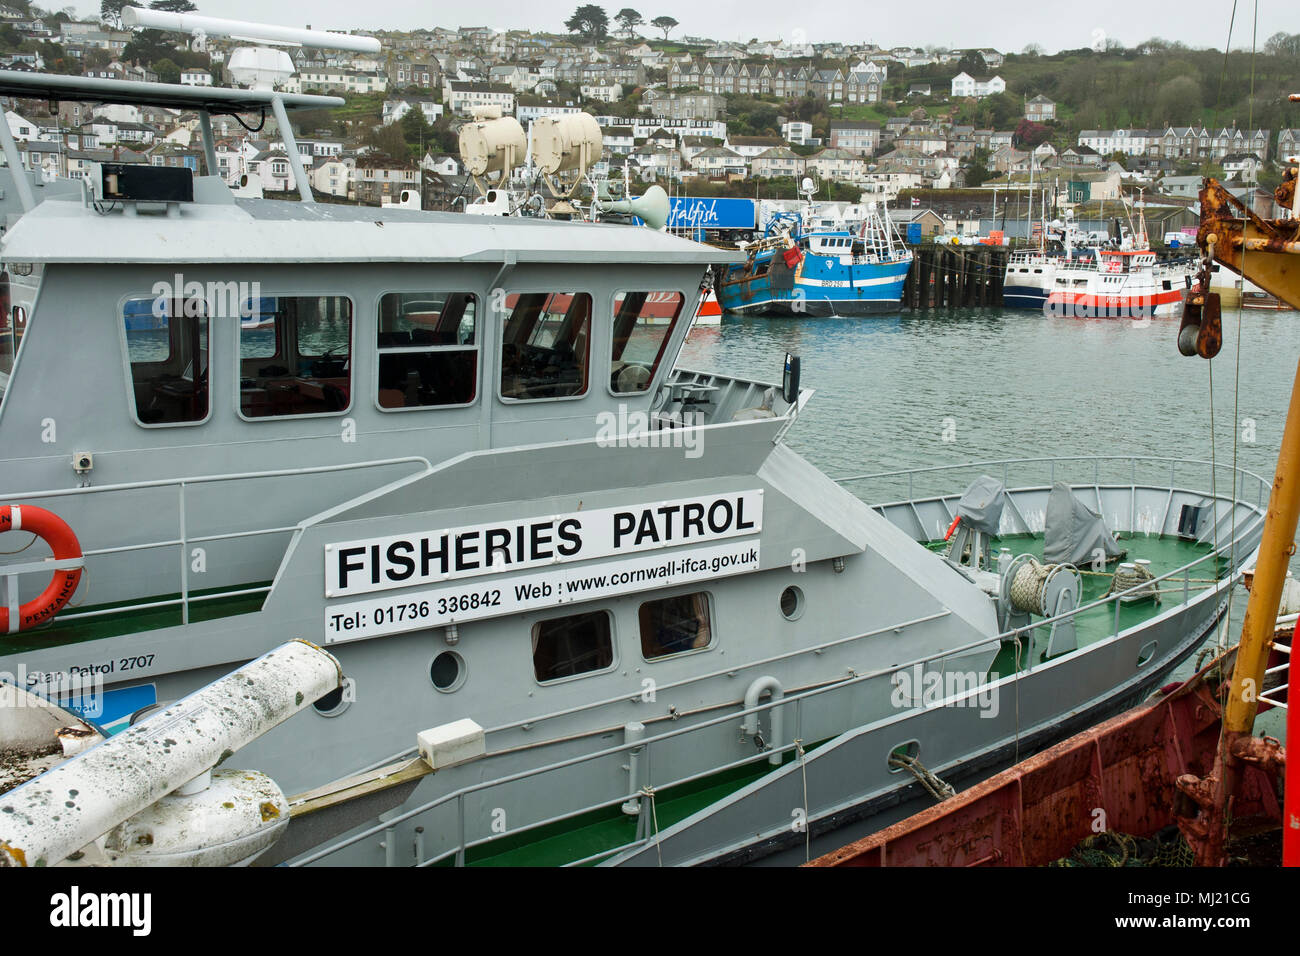 The Fisheries Patrol vessel, Saint Piran, in the foreground with fishing boats and the town of Newlyn in the background. Stock Photo